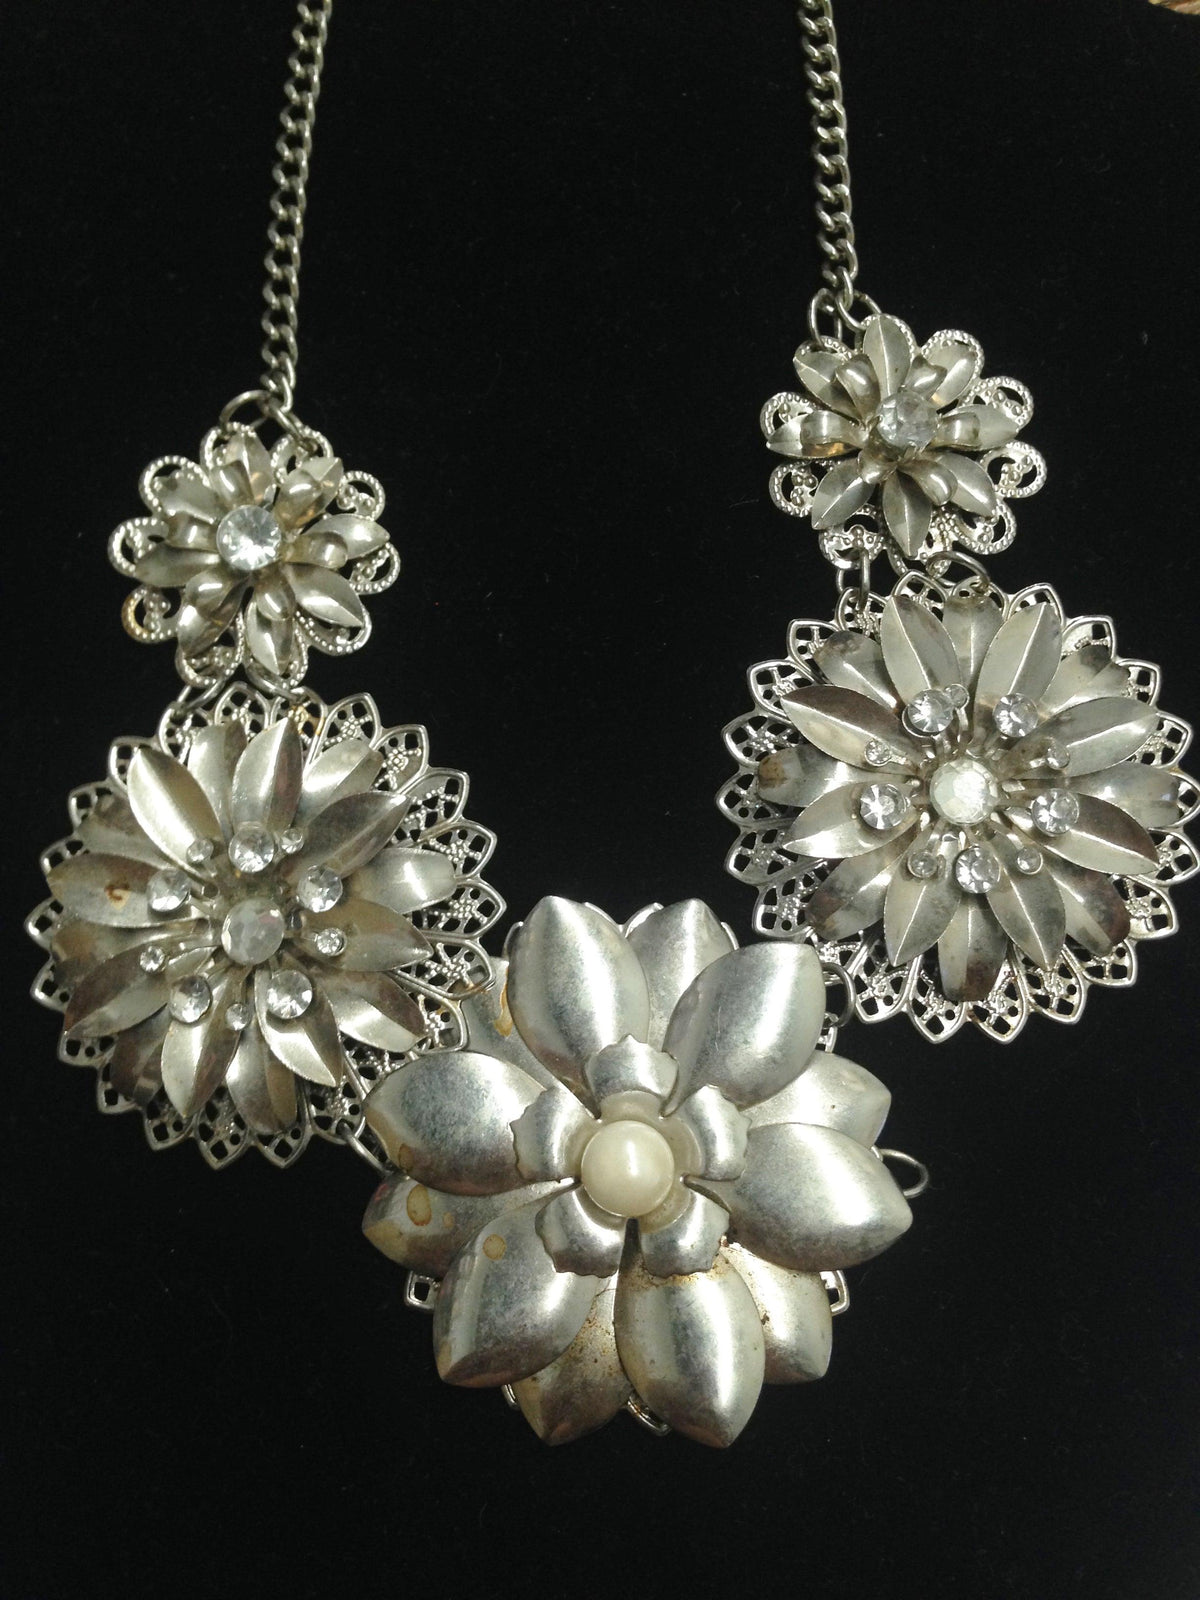 Silver Tone Filigree Flower Necklace - Hers and His Treasures